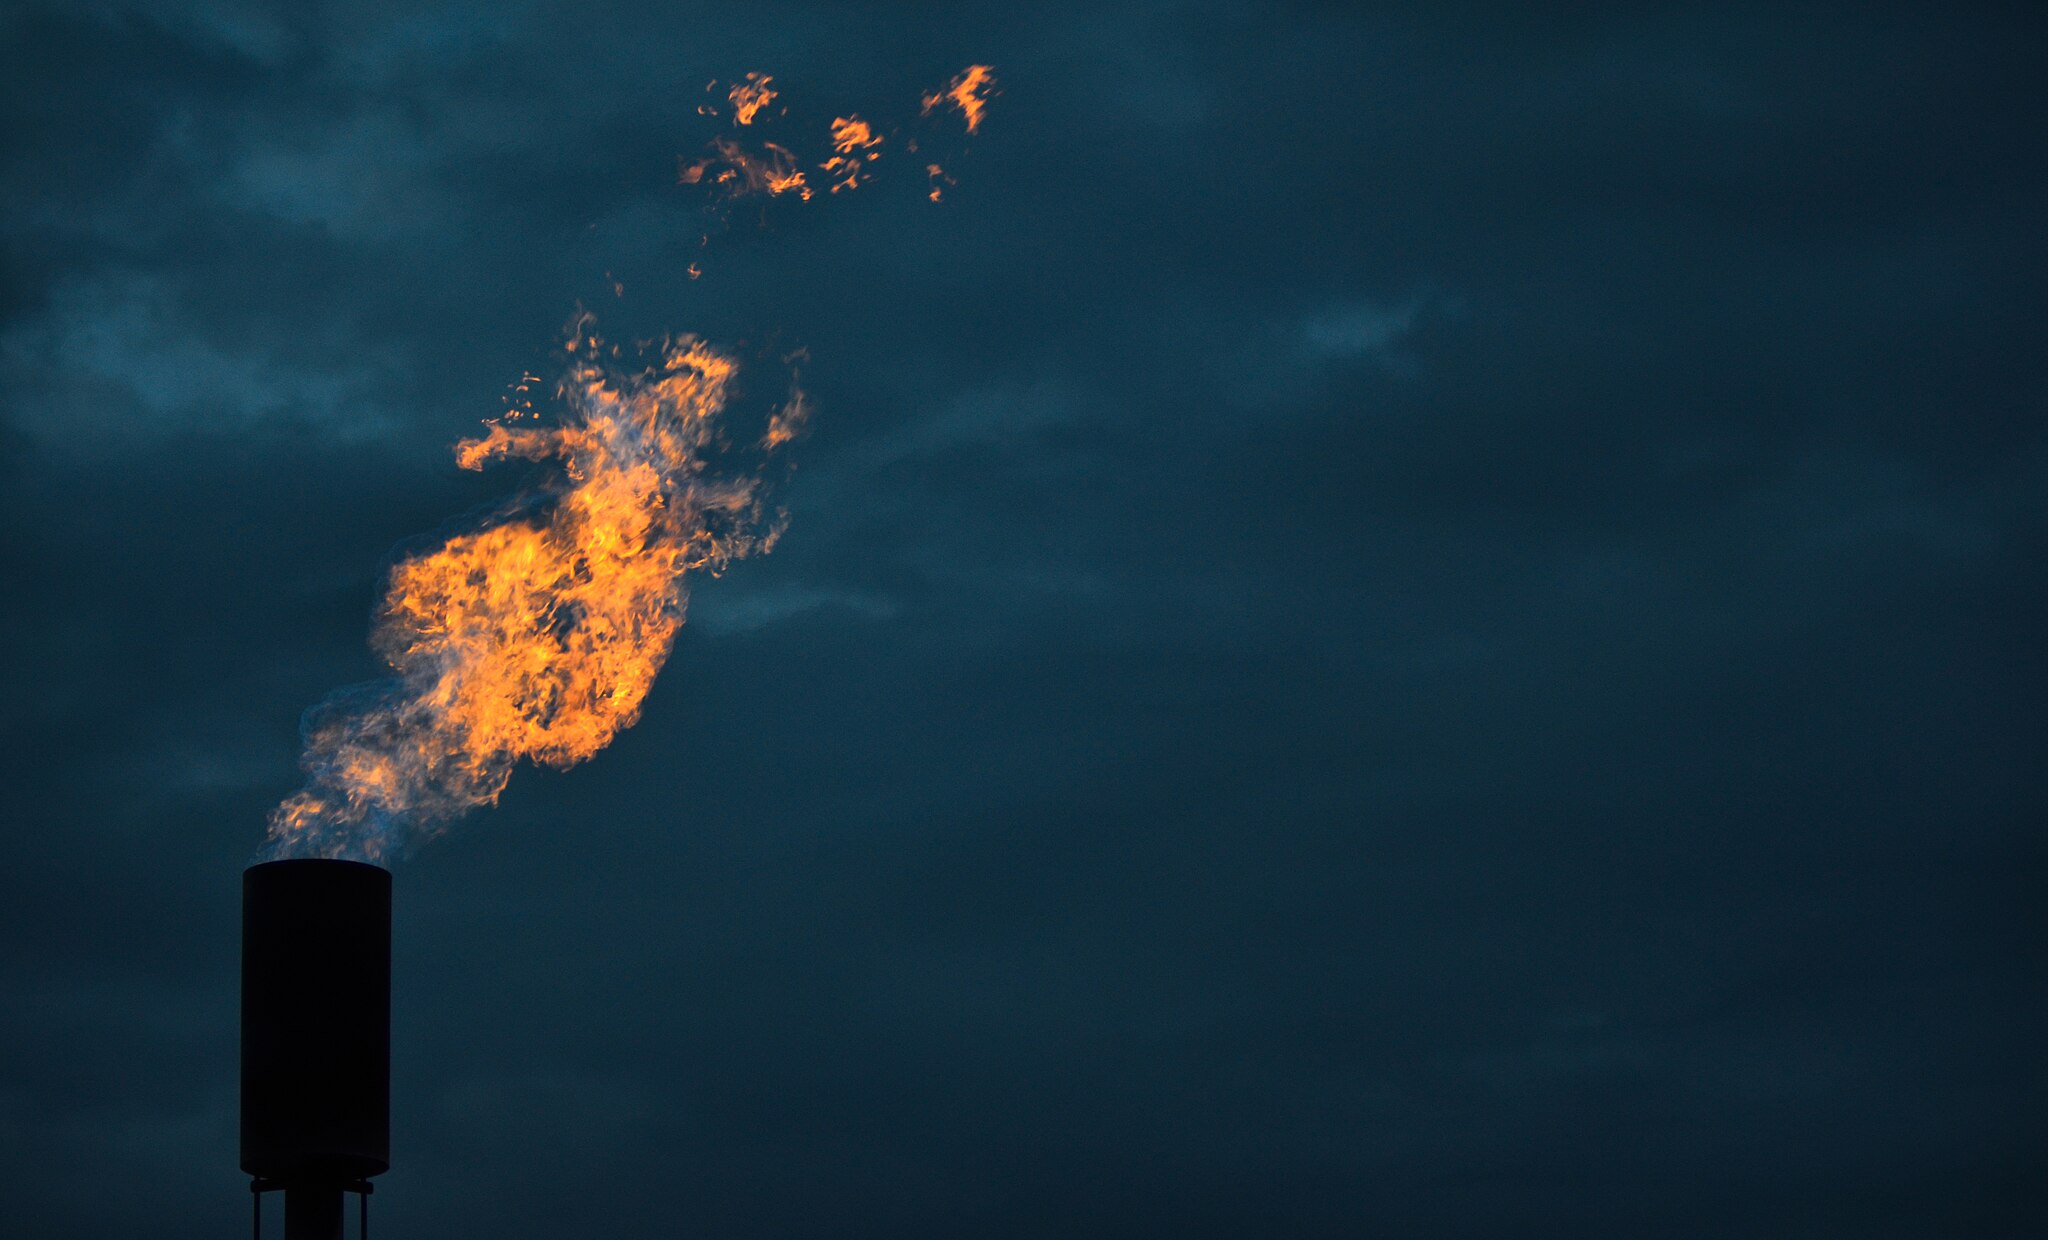 Methane burns from a flaring unit at a solid waste landfill.